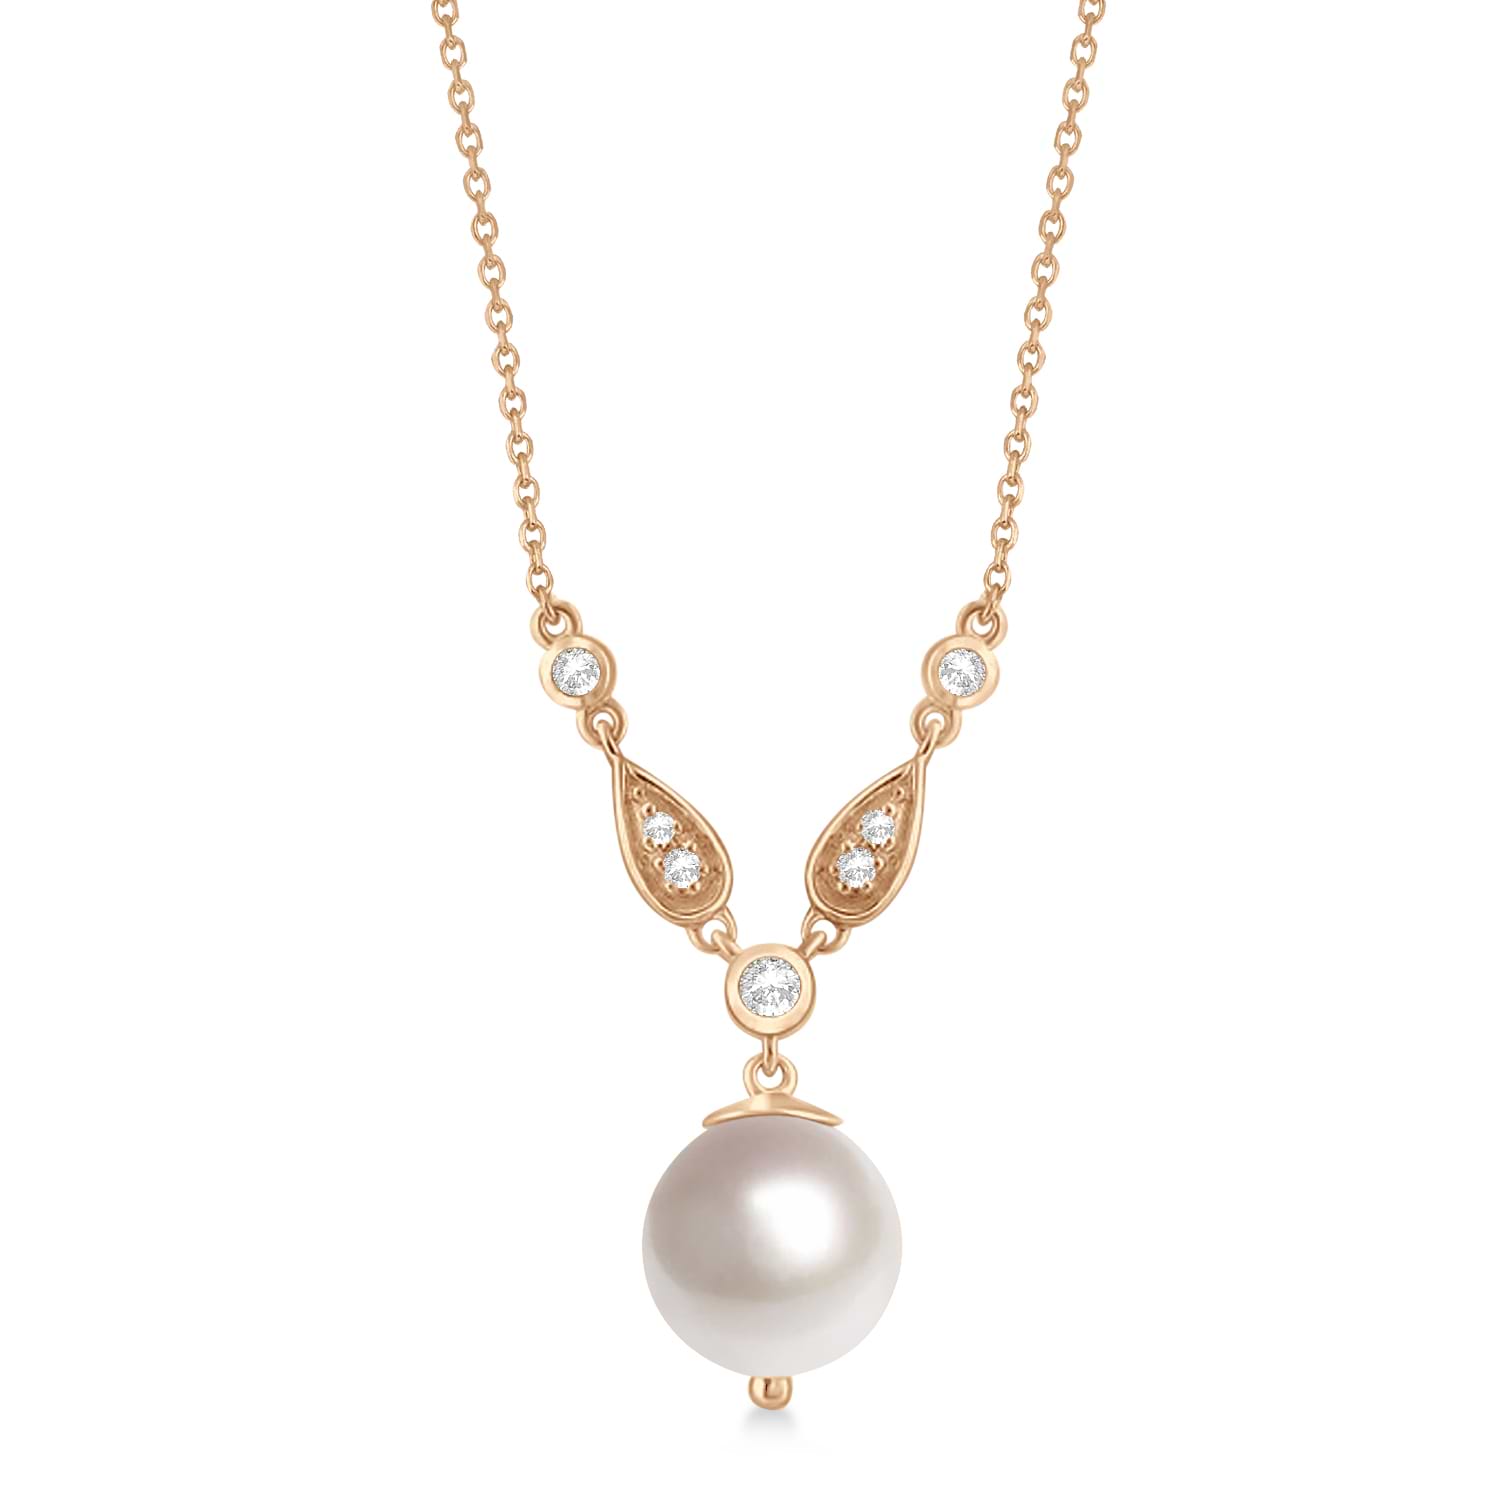 Freshwater Pearl & Diamond Accented Necklace 14k Rose Gold (10mm)